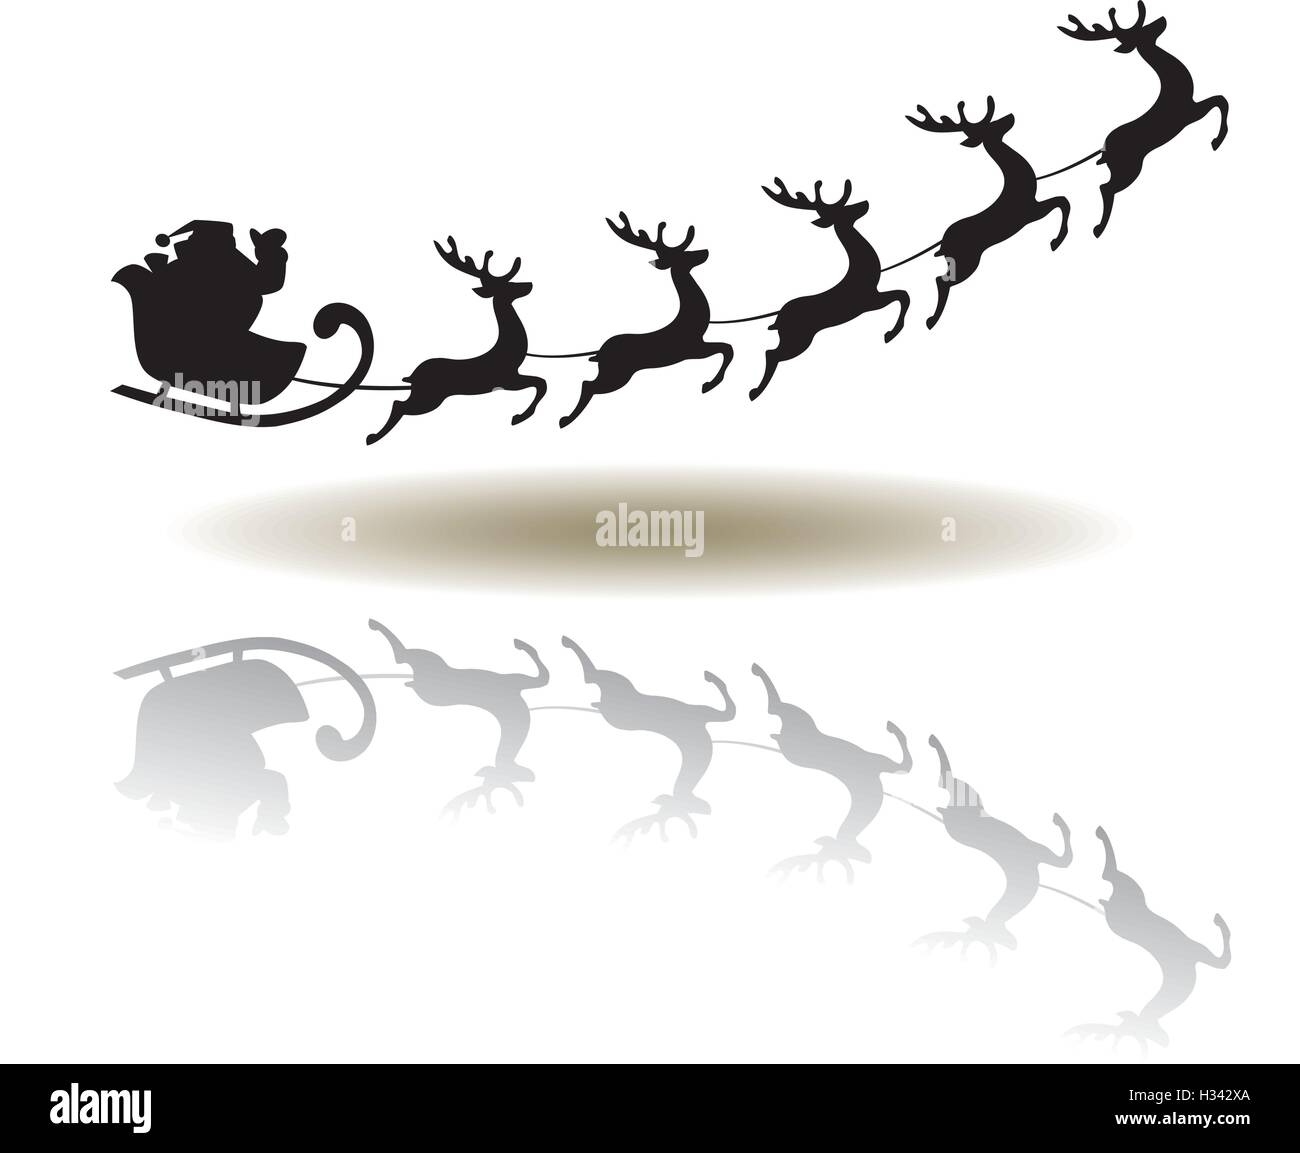 vector illustration of Santa Claus flying with reindeer Stock Vector